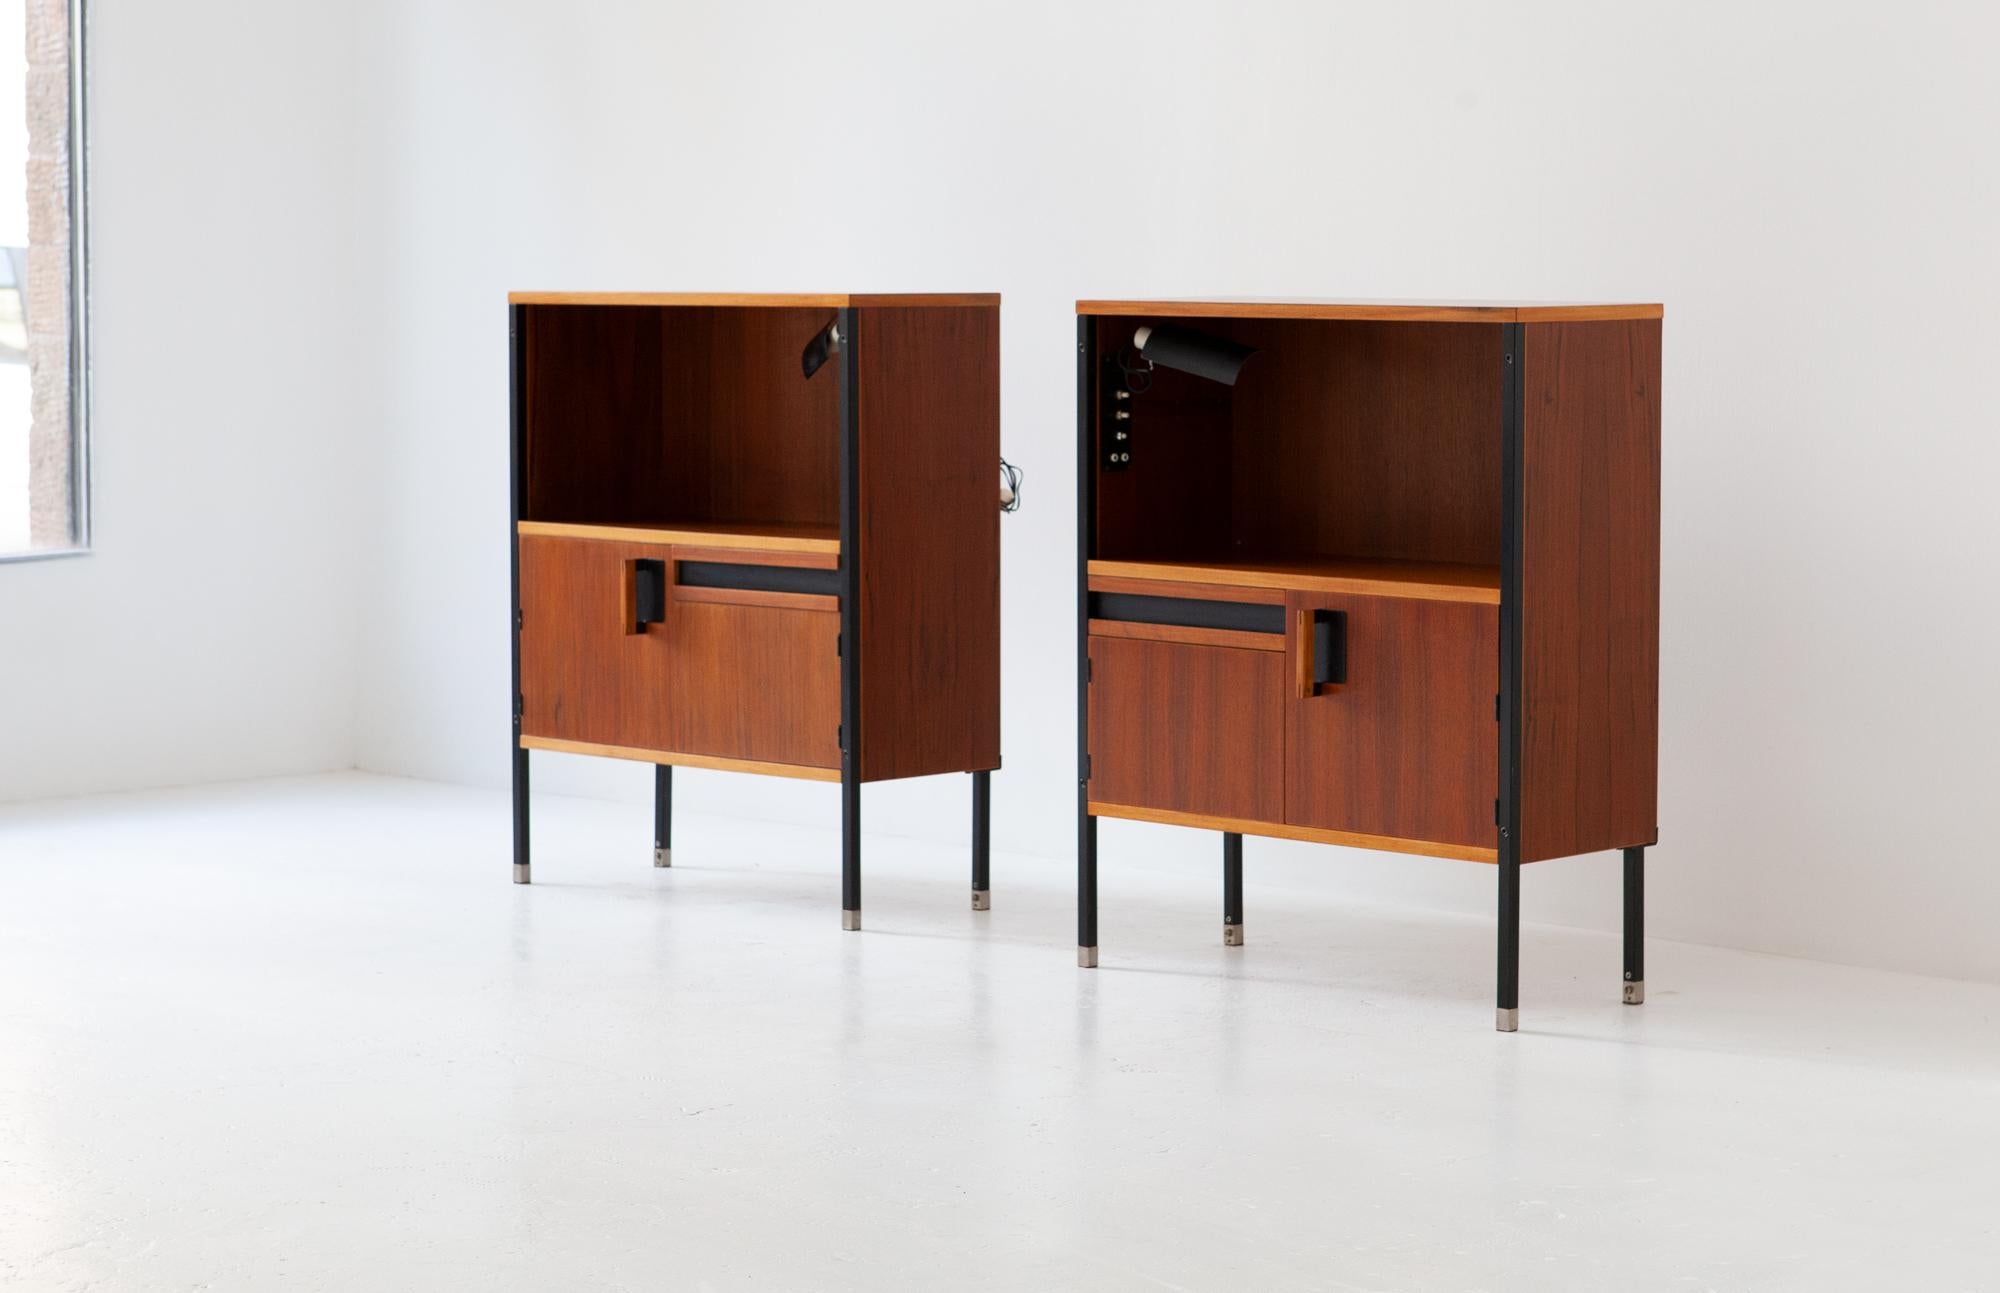 Very rare set of two Mid-Century Modern bedside tables from the '' Positano'' series designed by Ico Parisi for MIM Roma in 1958 
Veneered teak case and black painted iron .The two metal sconces model 222 were designed by Gino Sarfatti for Arteluce